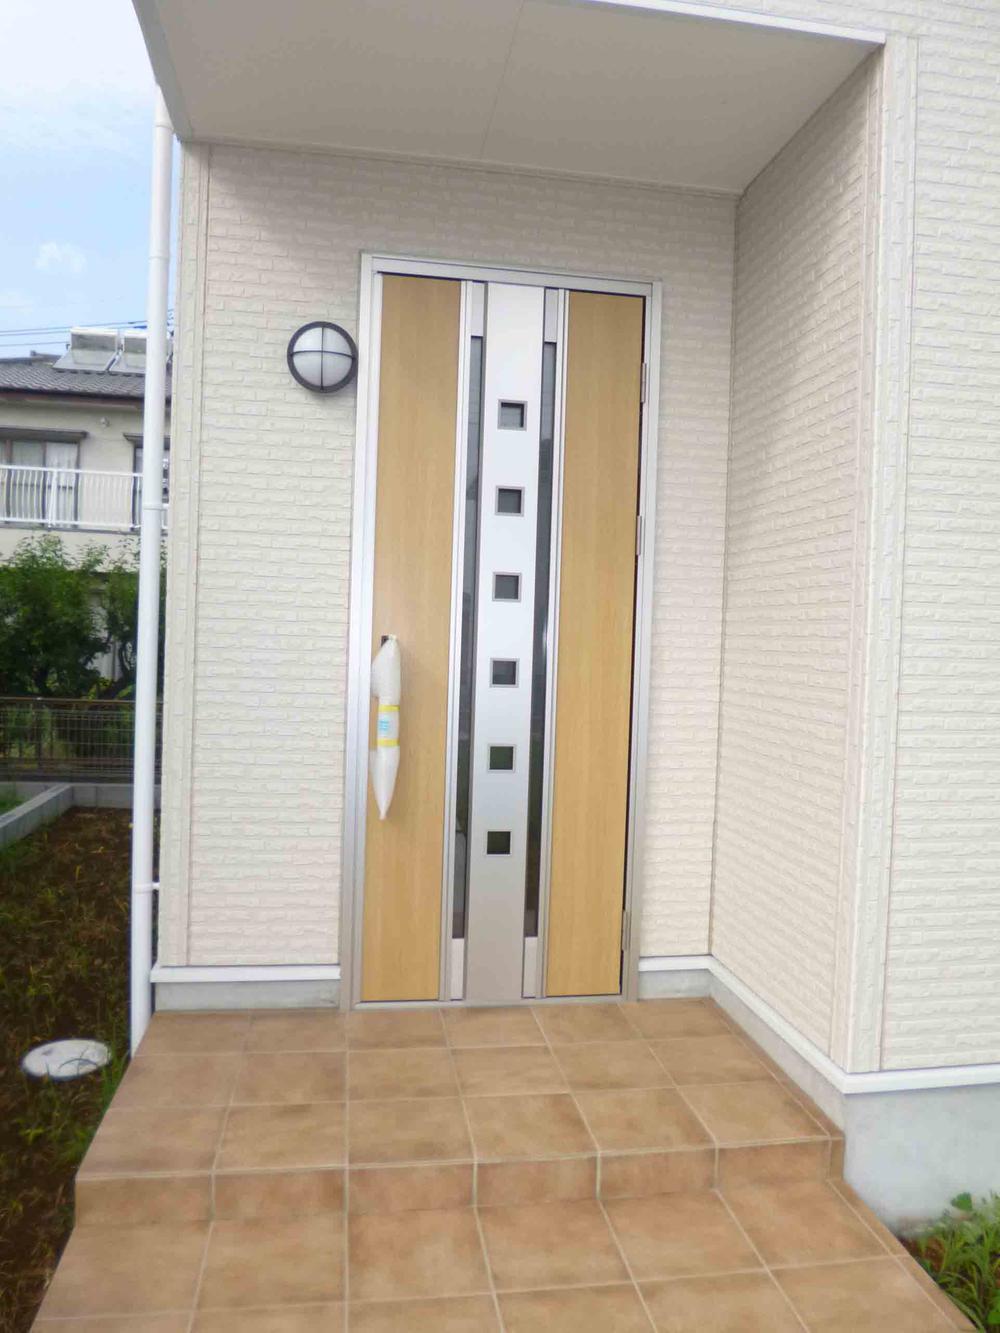 Entrance. Example of construction. Door is a double lock of dimple key with excellent picking measures. 